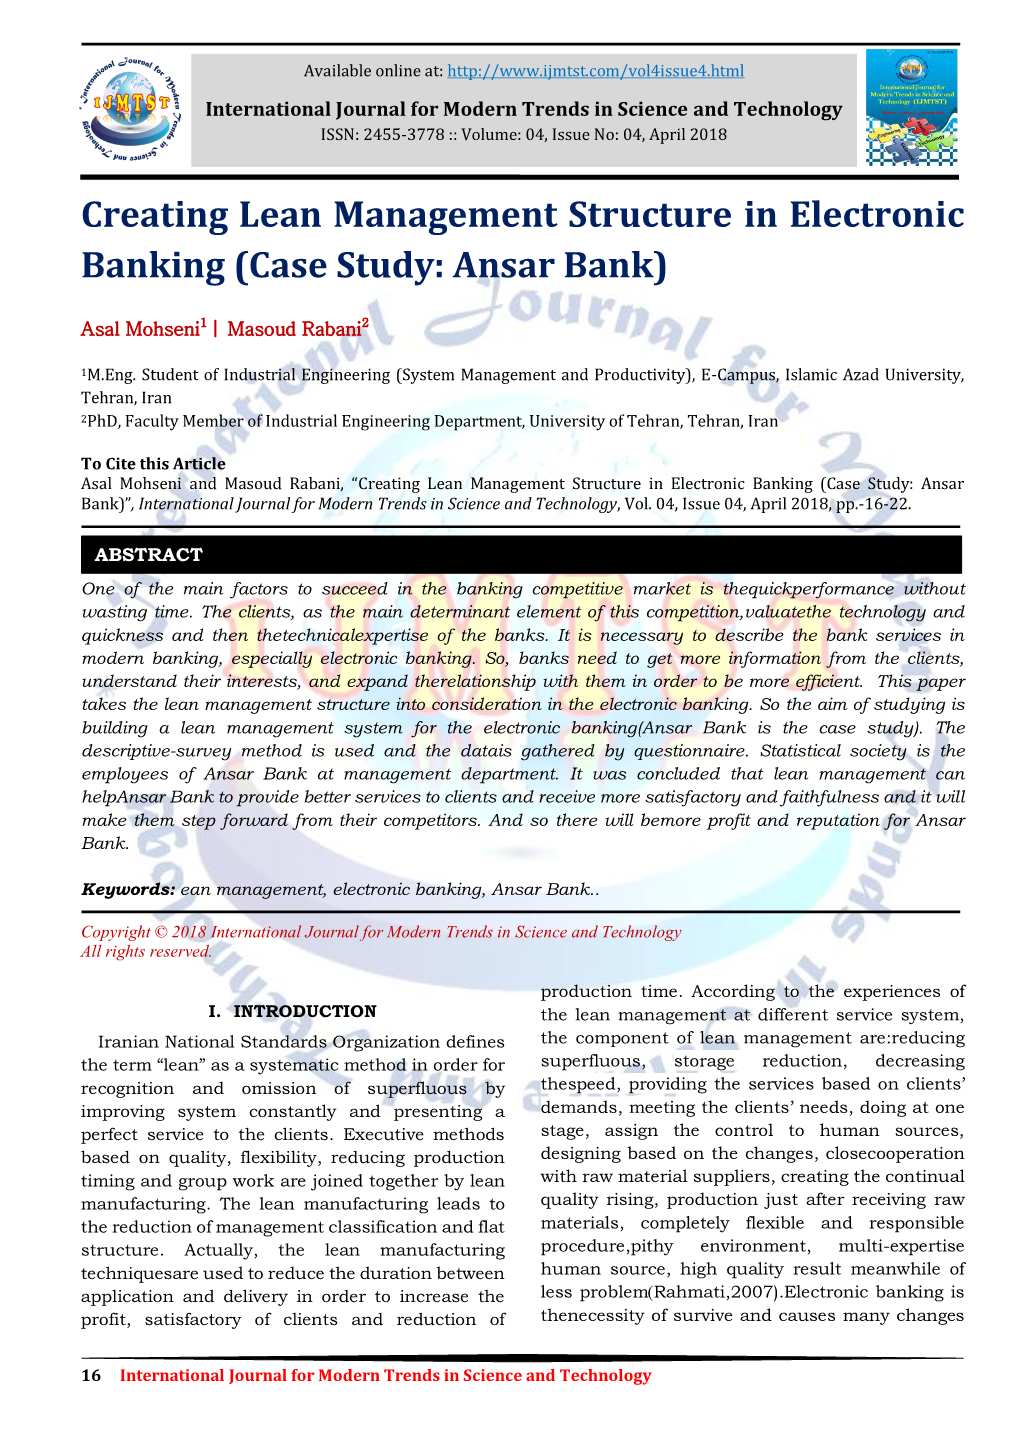 Creating Lean Management Structure in Electronic Banking (Case Study: Ansar Bank)